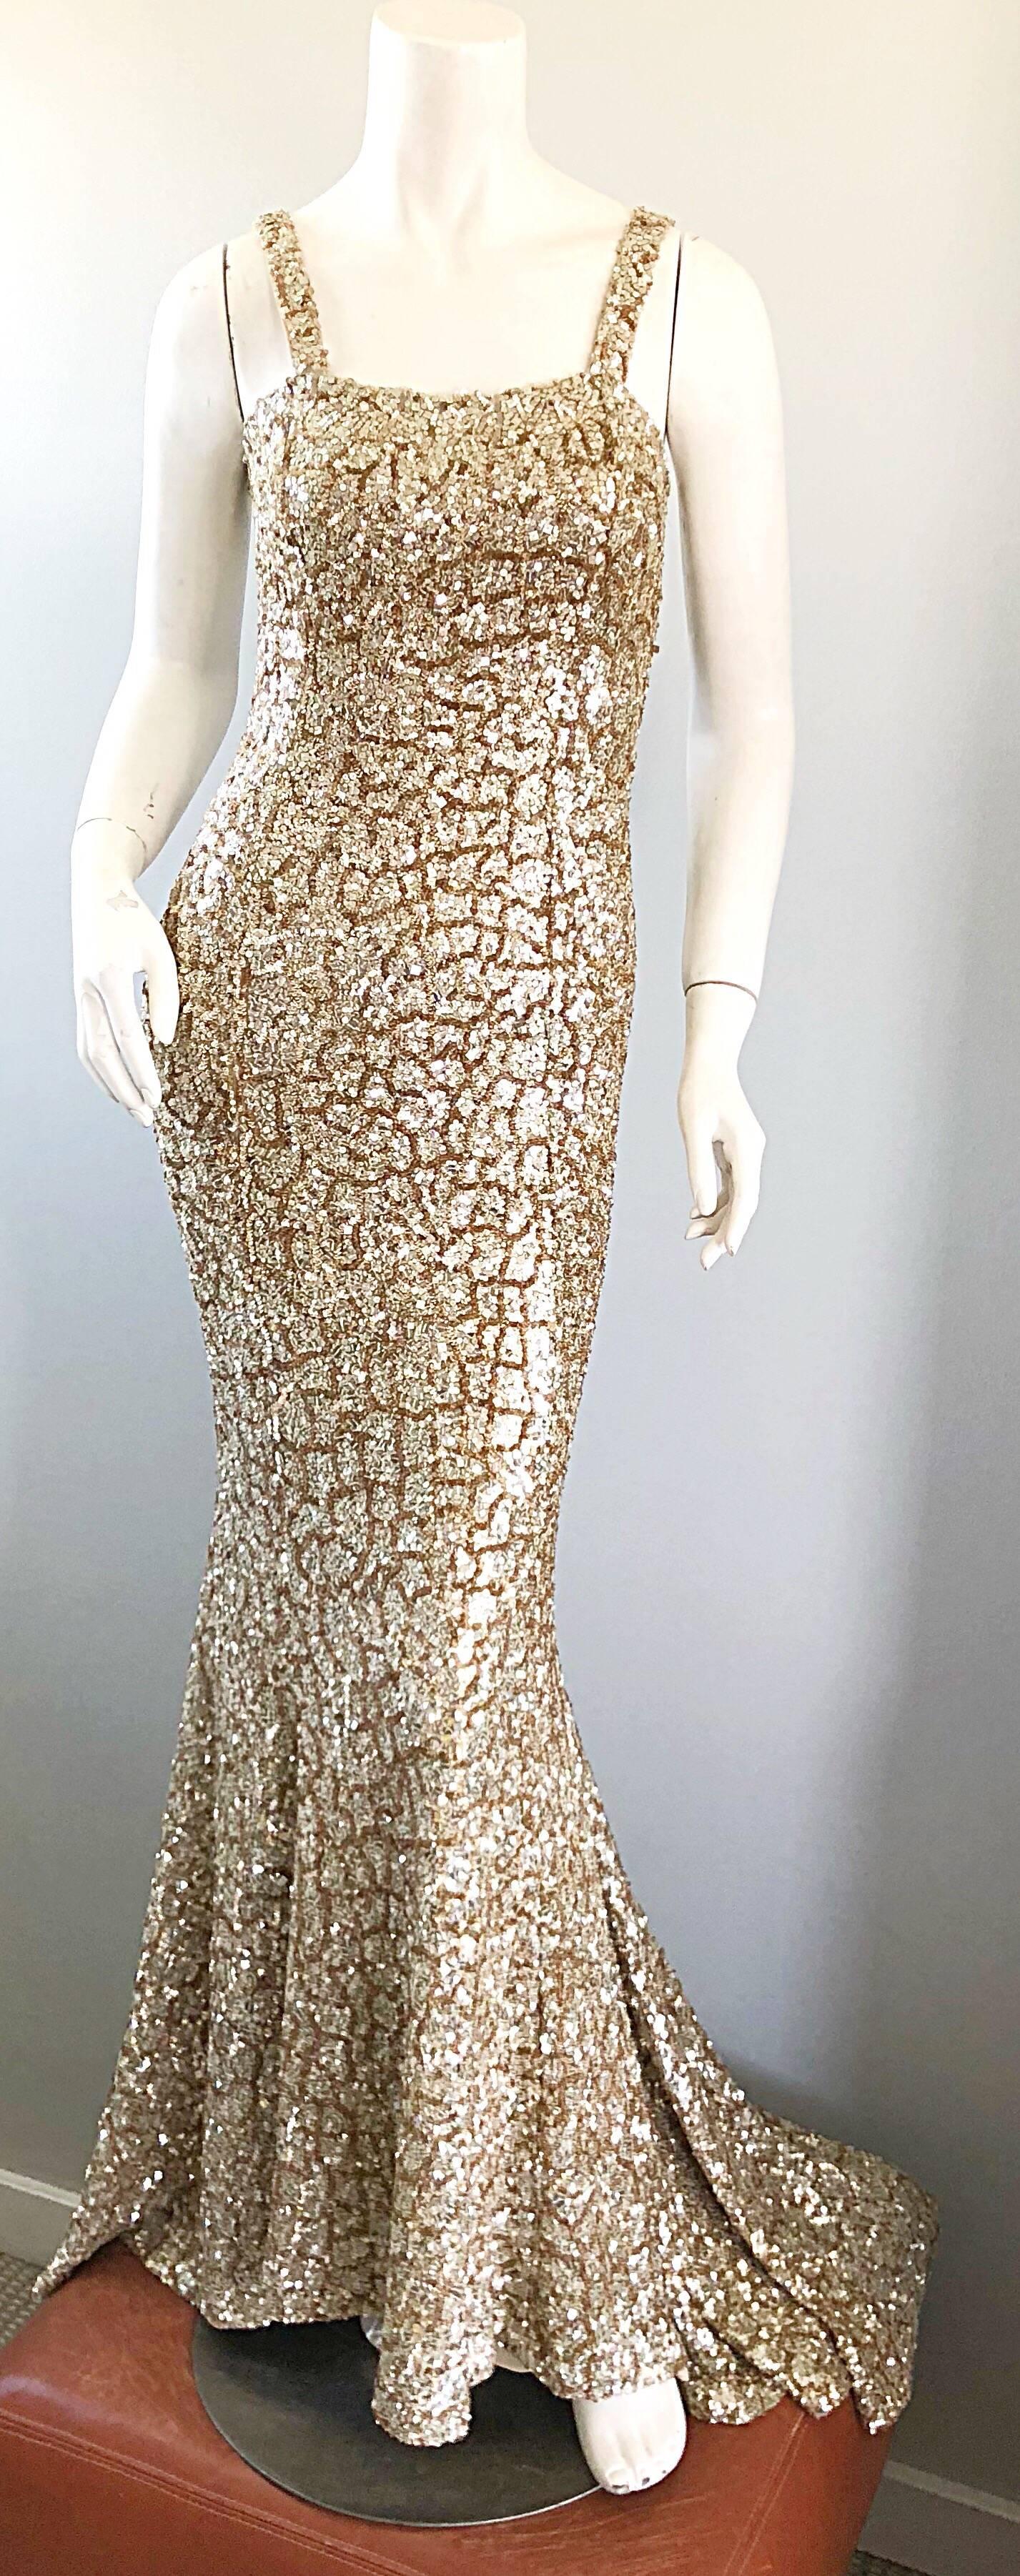 Monique Lhuillier Gorgeous Resort 2012 Gold Rose Gold Full Sequin Trained Gown  10